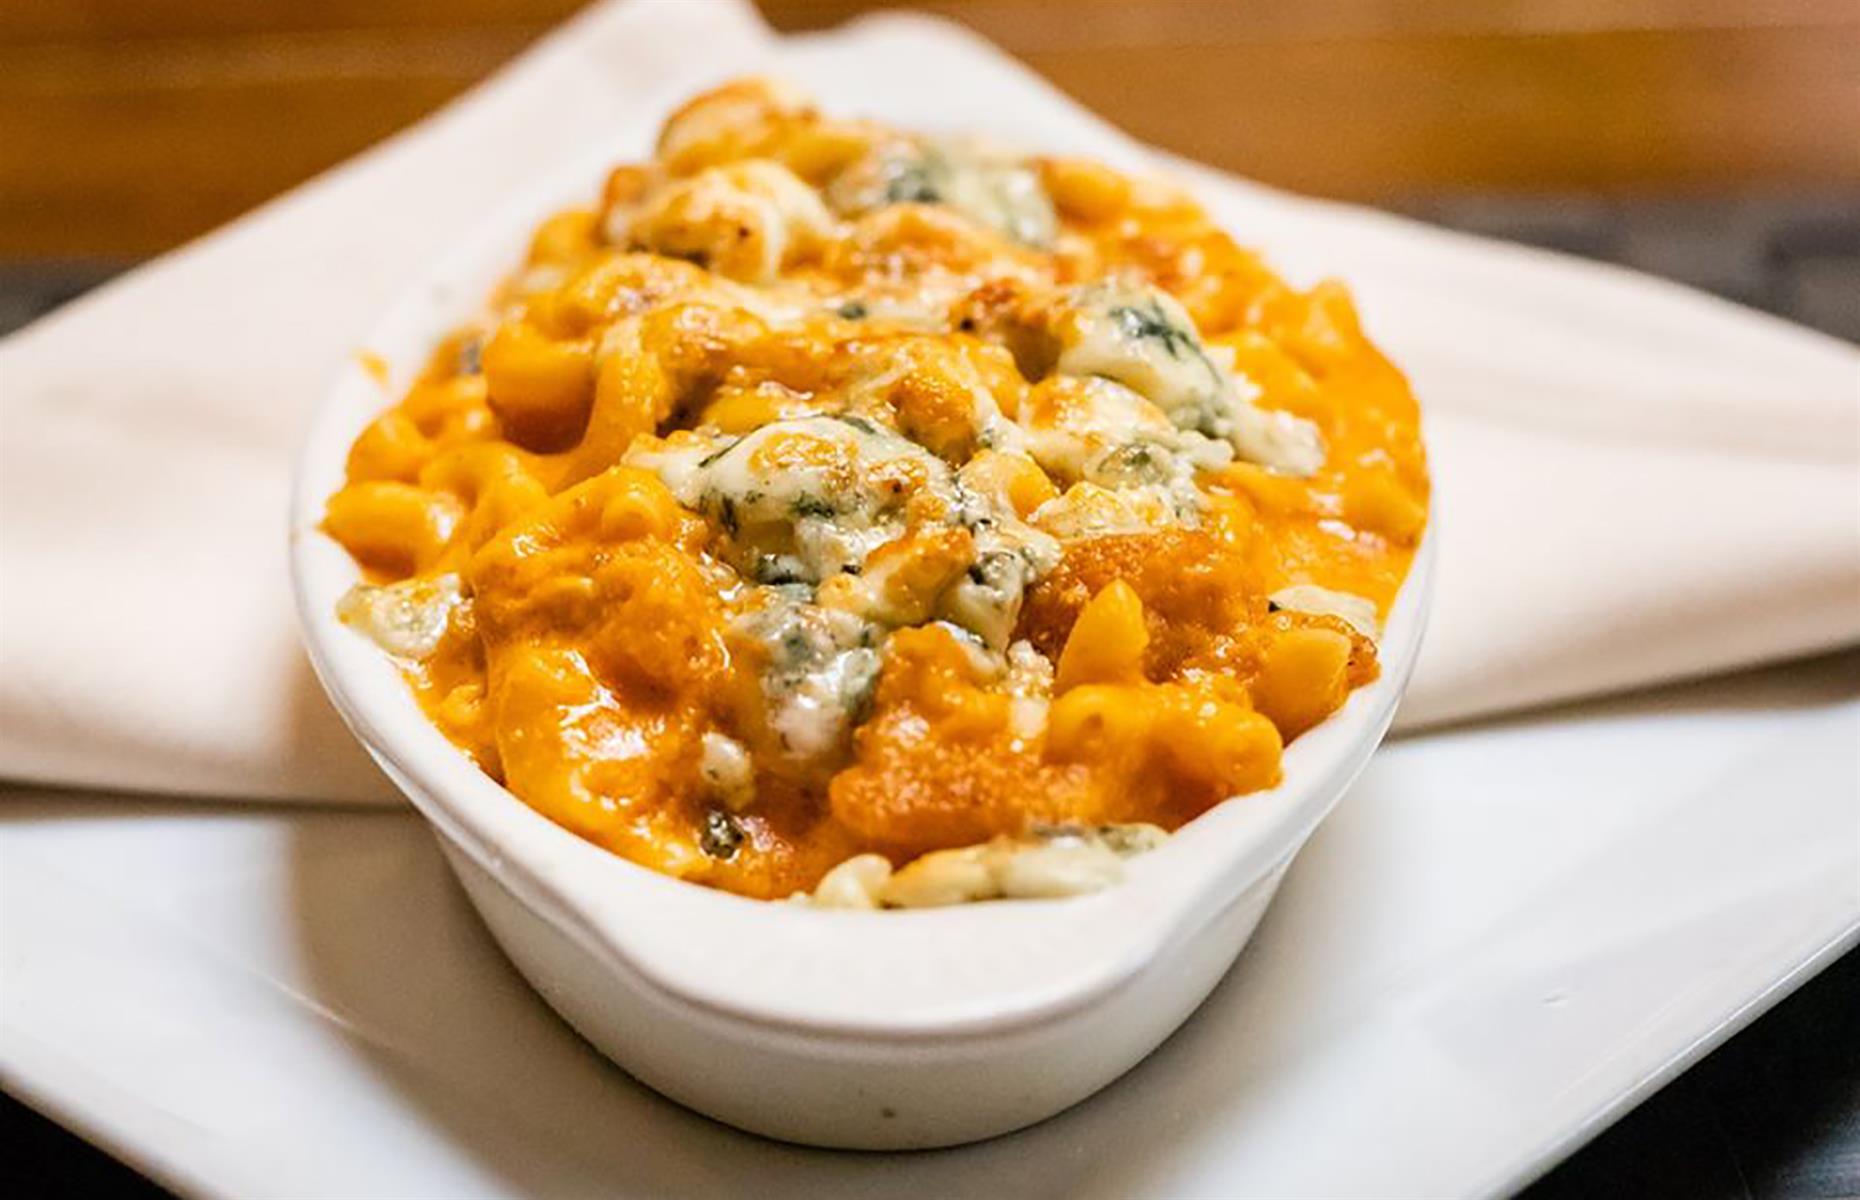 Revealed: Your State's Most Delicious Mac ’n’ Cheese